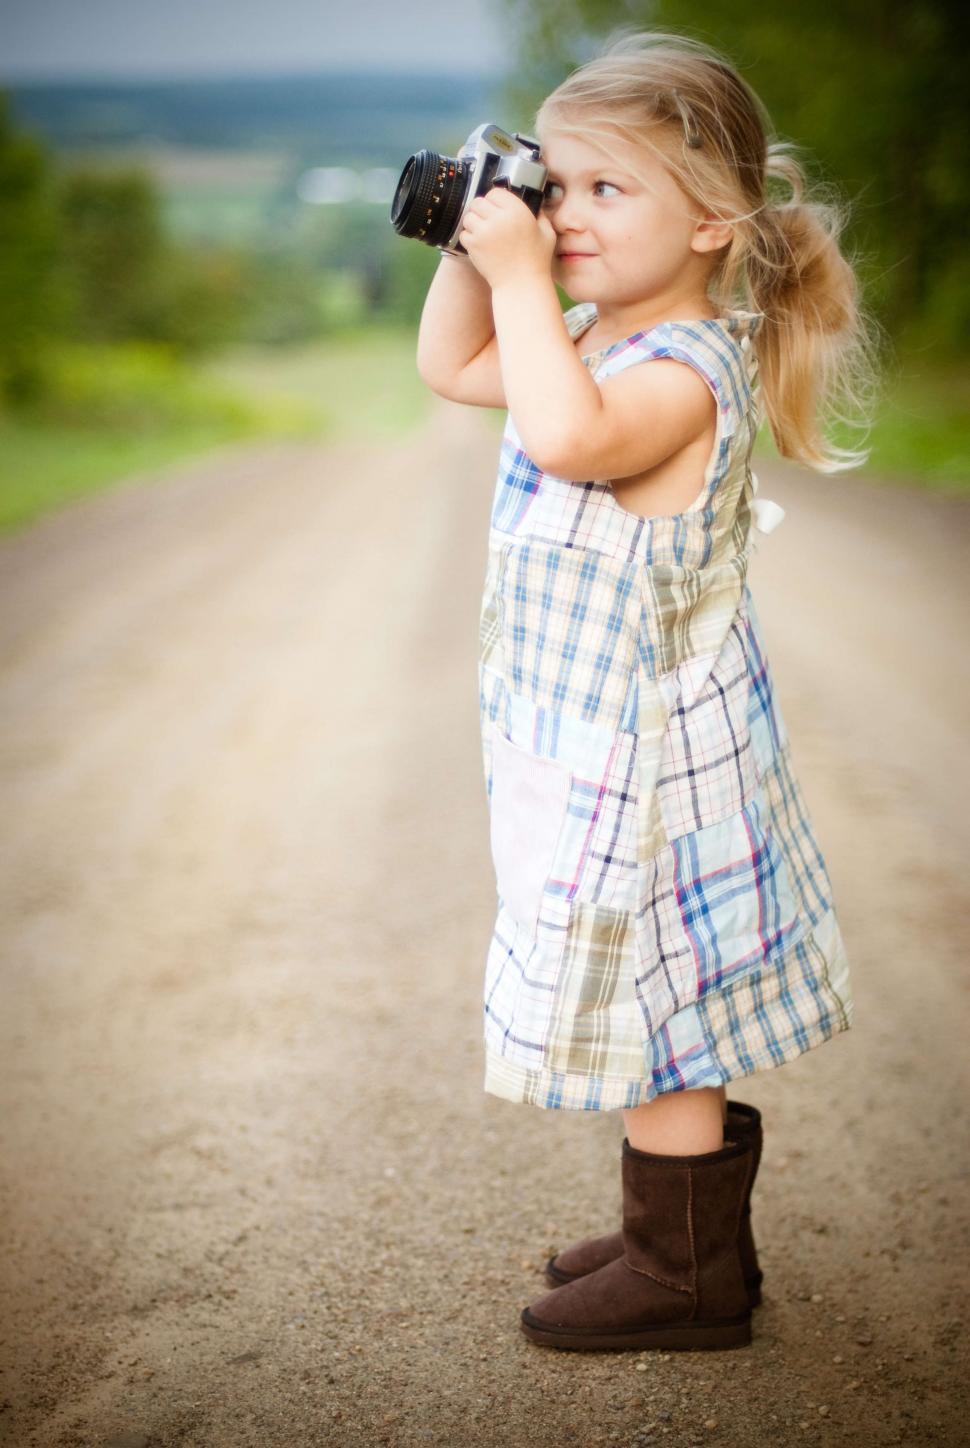 Free Stock Photo of Blonde girl child with camera | Download Free Images  and Free Illustrations